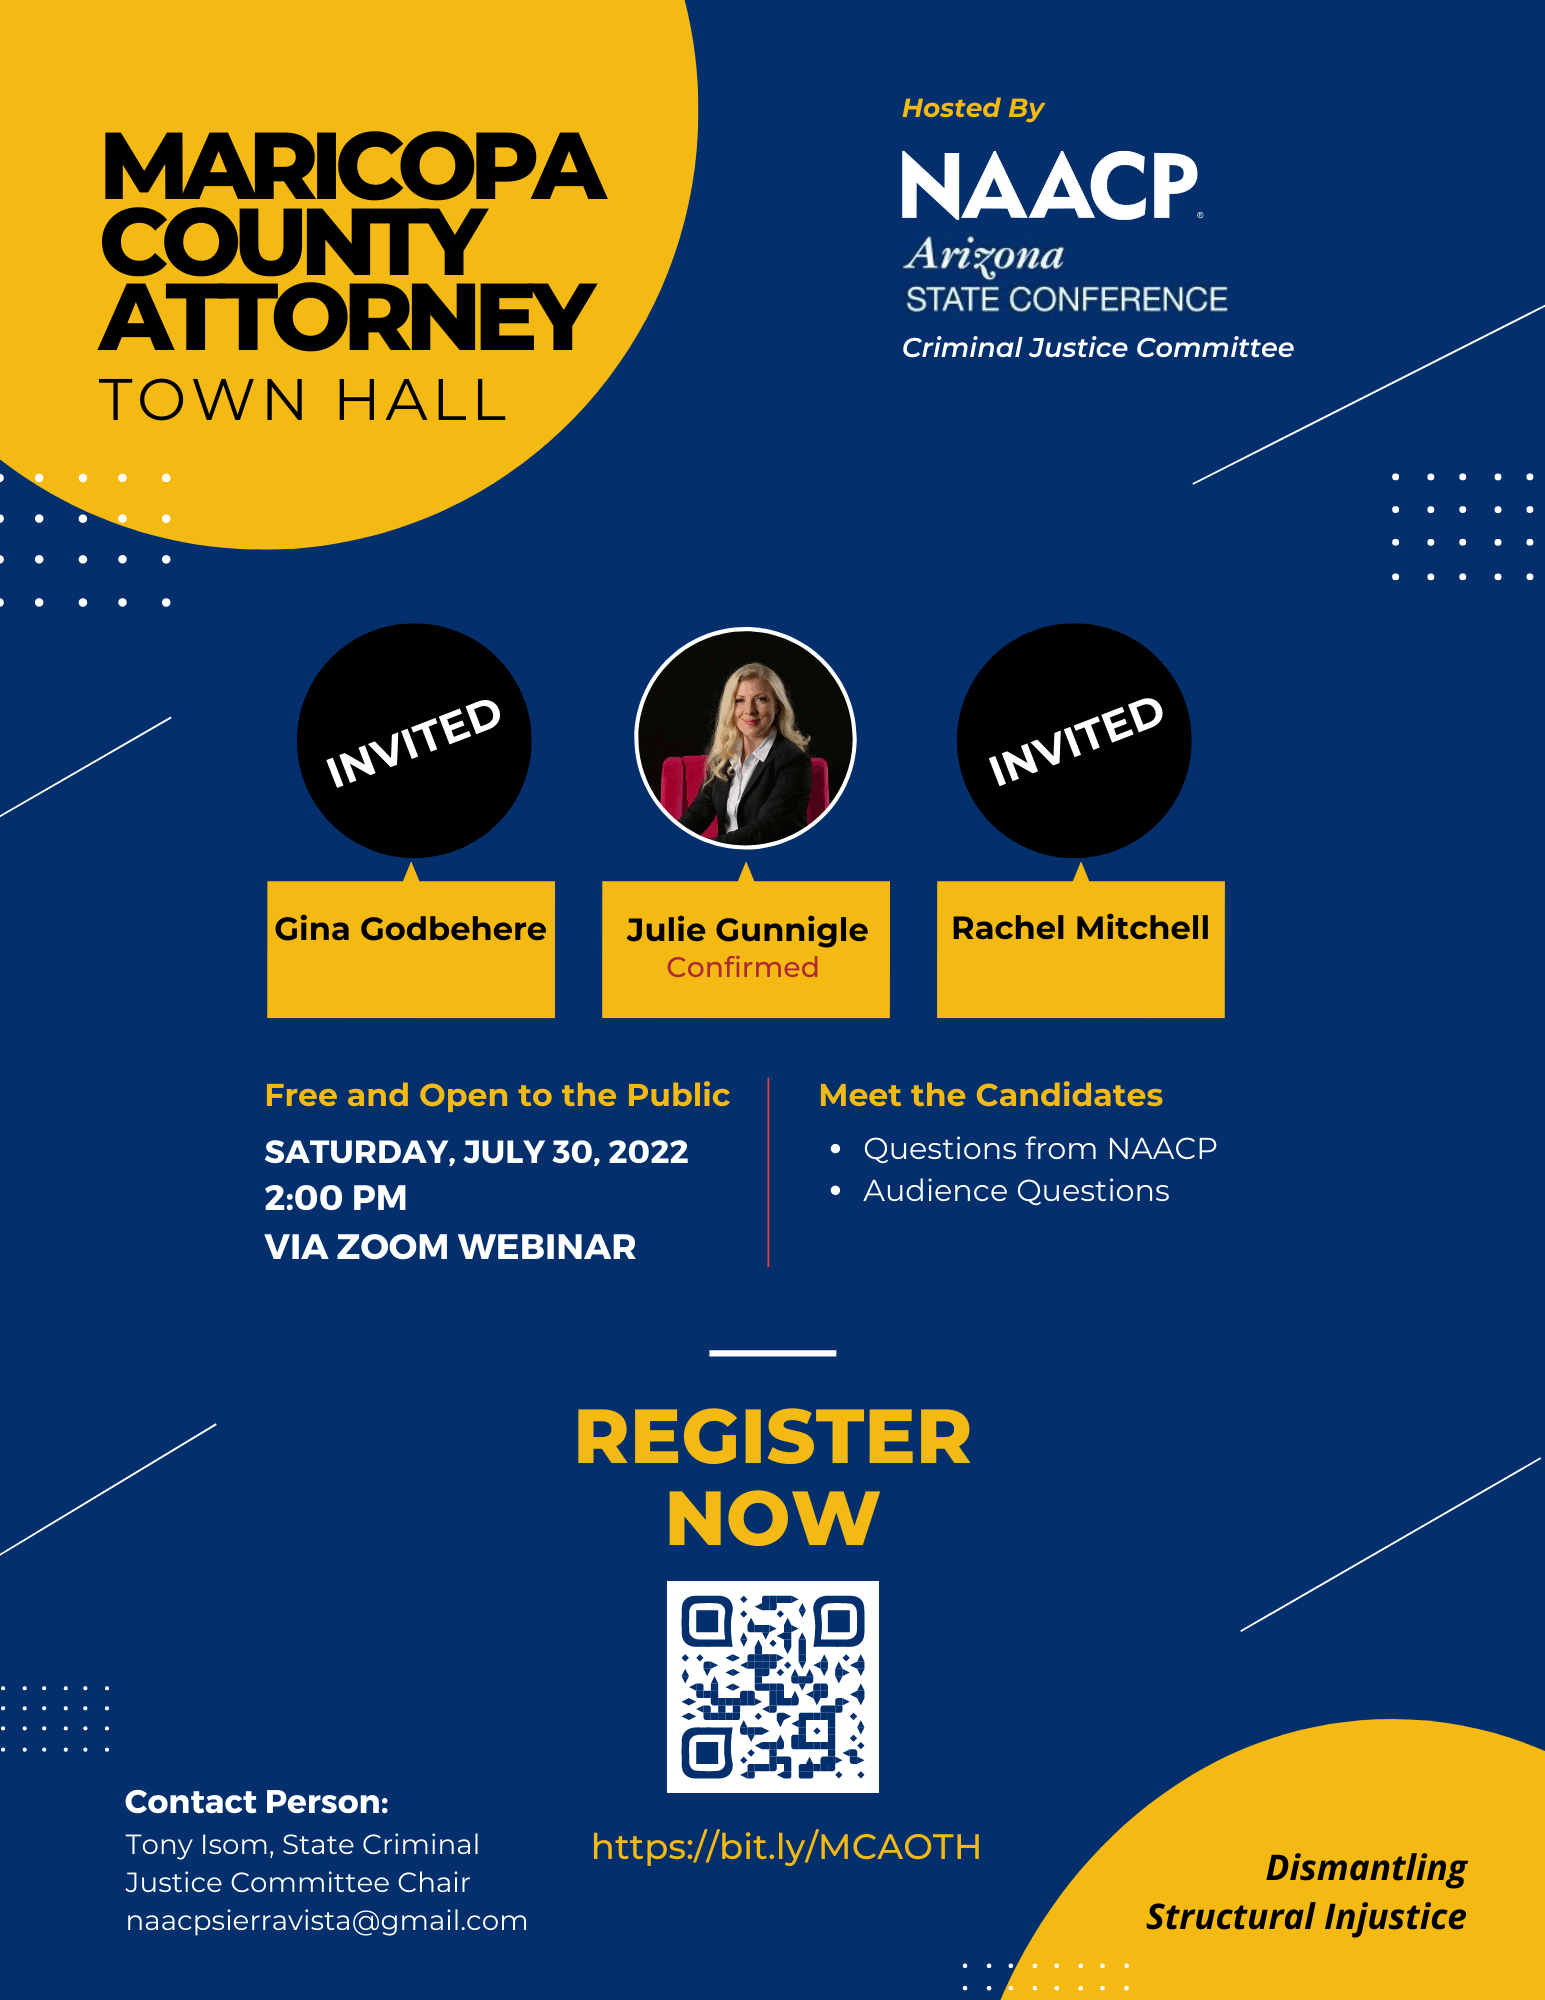 Promotion of Maricopa County Attorney Town Hall, hosted by NAACP Arizona State Conference Criminal Justice Committee. Open to the public via Zoom webinar on July 30th 2022 at 2PM MST. Meet the candidates, ask questions, and hear answers to the NAACP's questions. Contact Tony Isom, State Criminal Justice Committee Chair at naacpsierravista@gmail.com for questions. Register at the following URL. https://bit.ly/MCAOTH